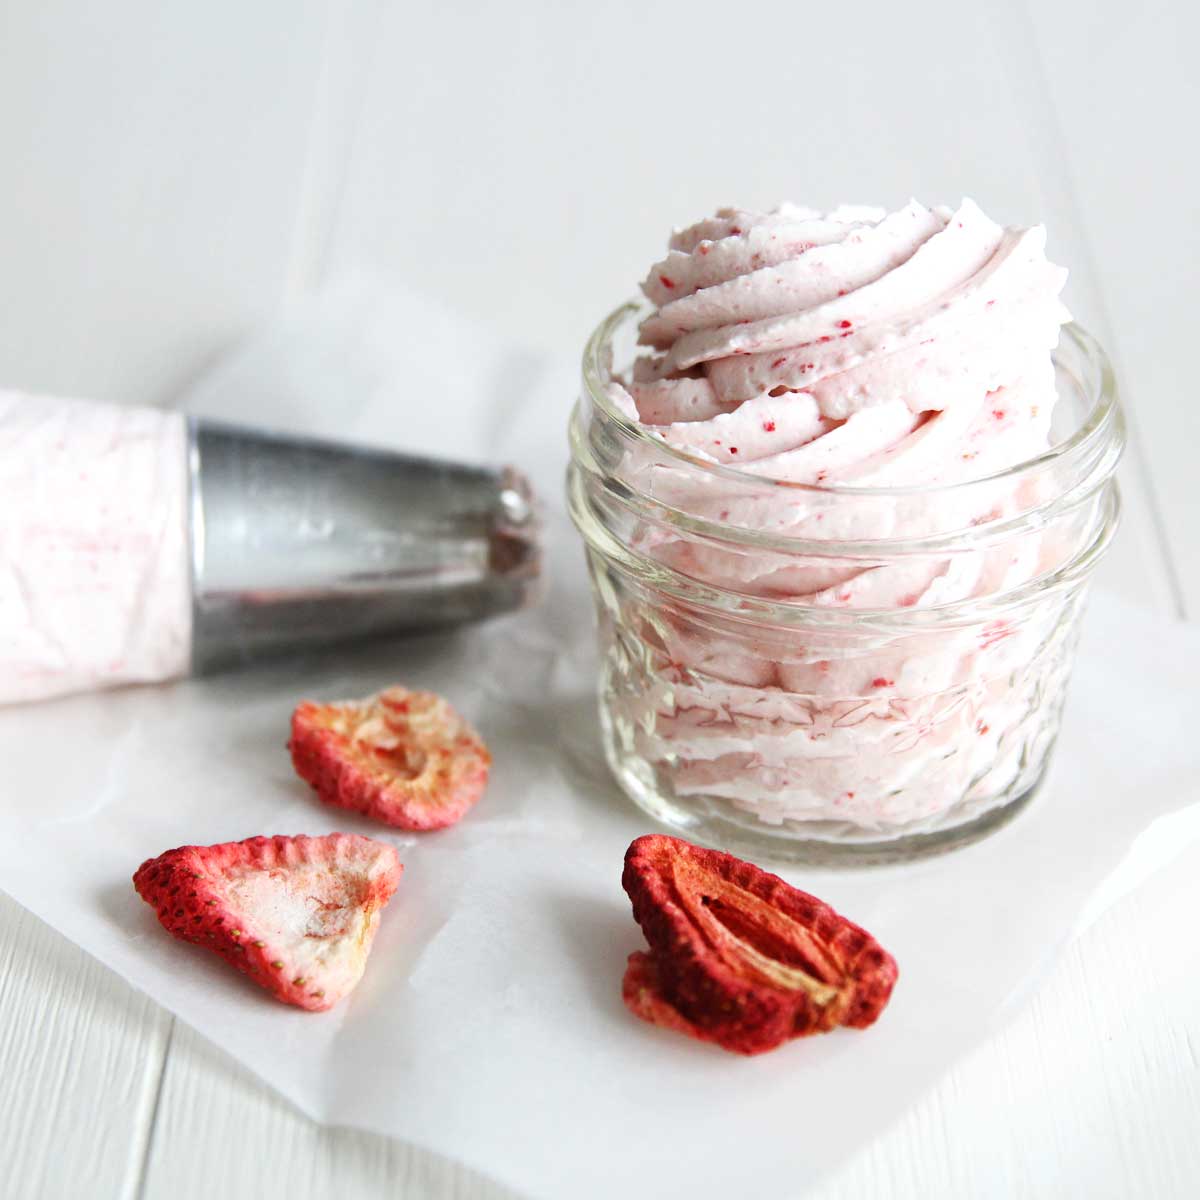 Creamy & Thick Strawberry Cheesecake Whipped Cream (Low-Carb, Keto Recipe) - Brown Sugar Whipped Cream